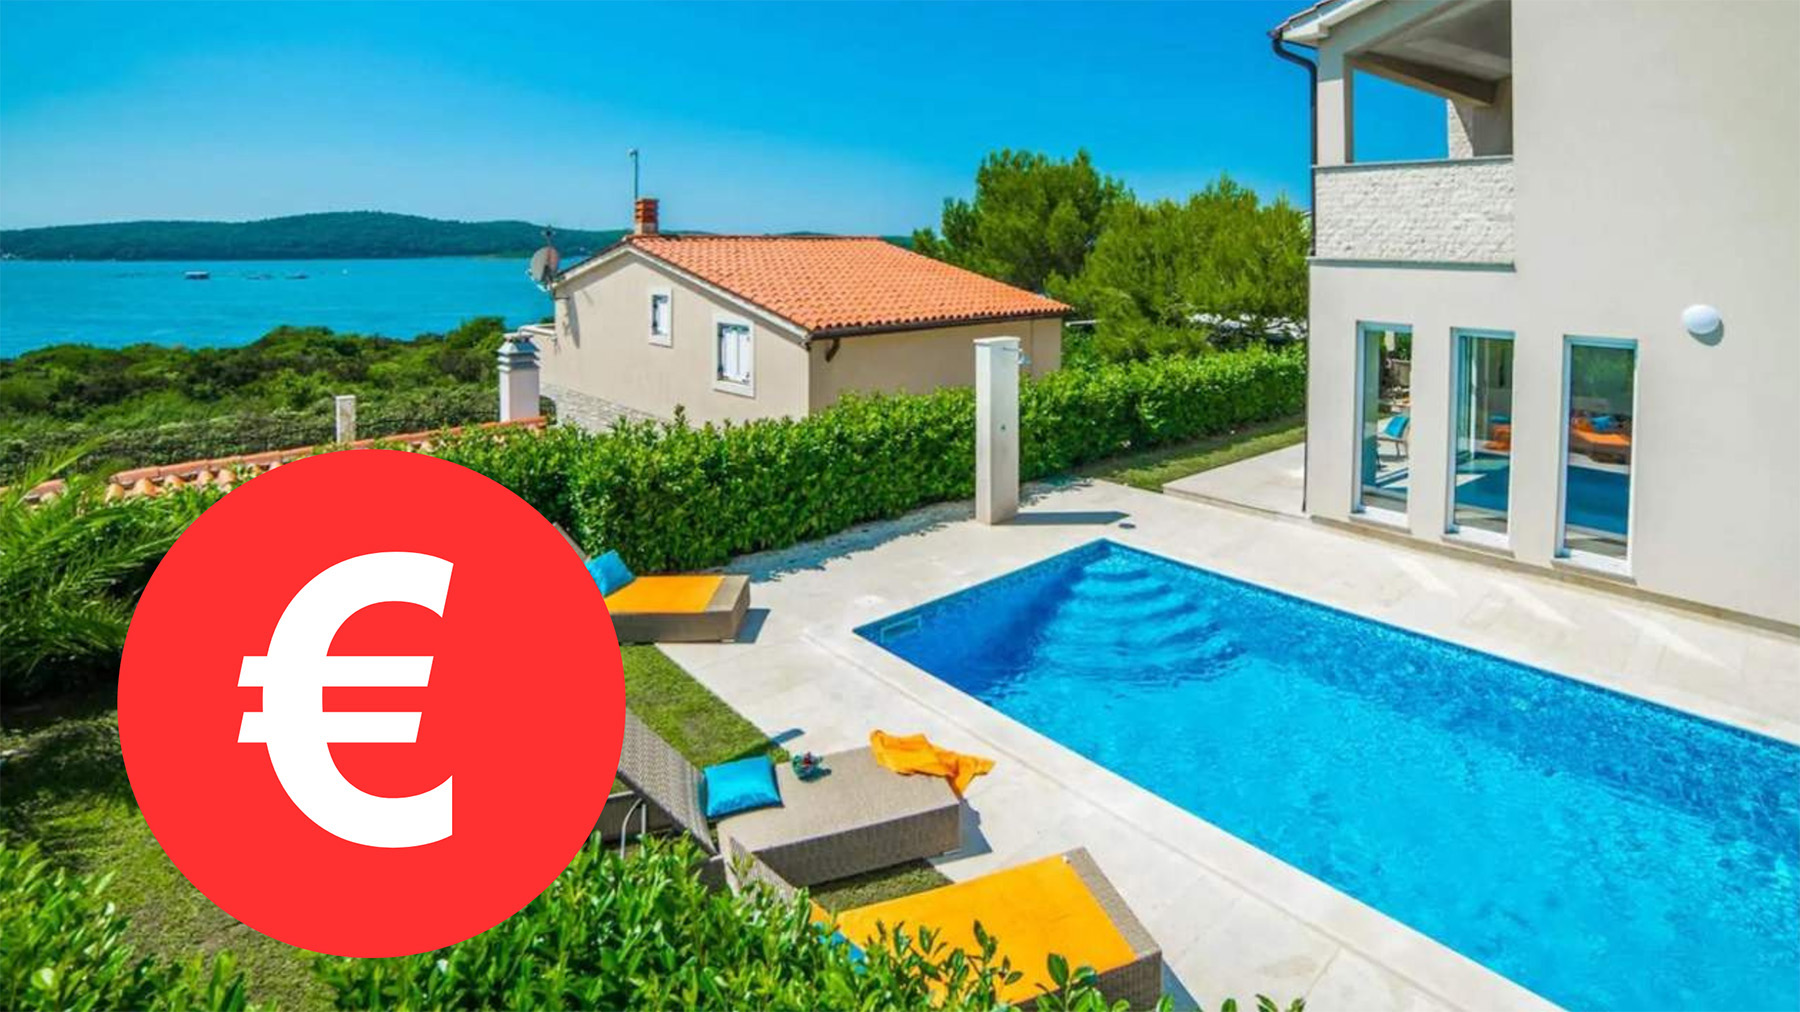 Price explosion in Croatia: What's behind the soaring costs?